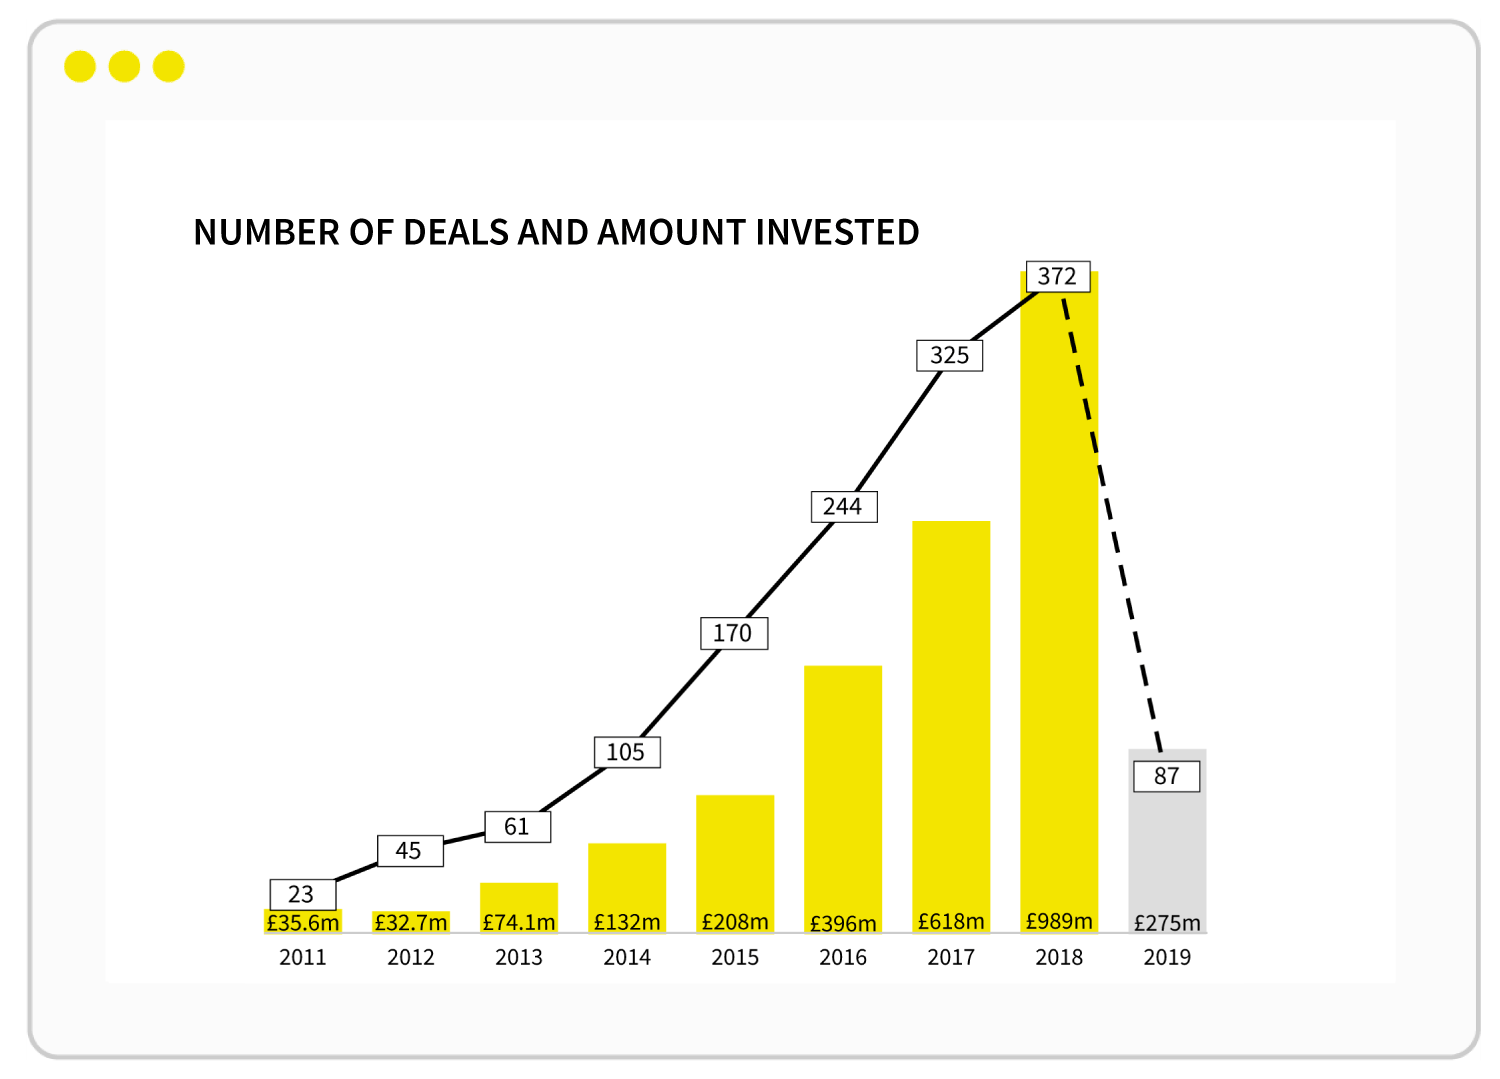 Number of deals and amount raised by UK AI companies